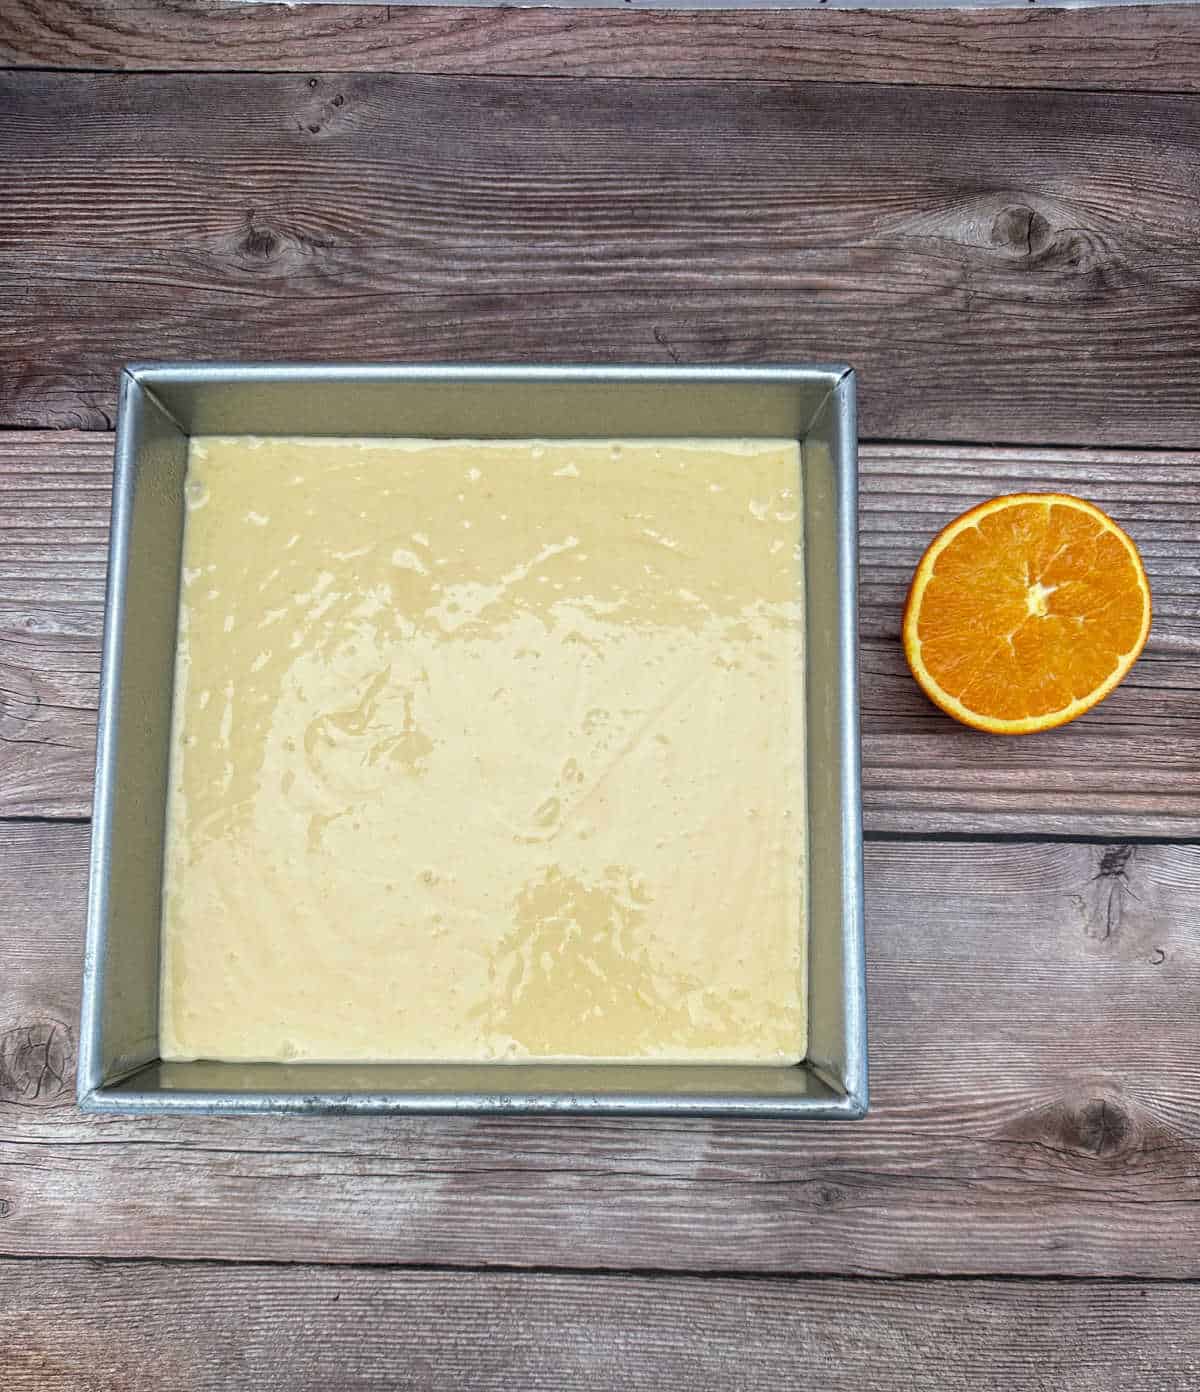 Process shot - cake batter in a pan with a halved orange next to it. 